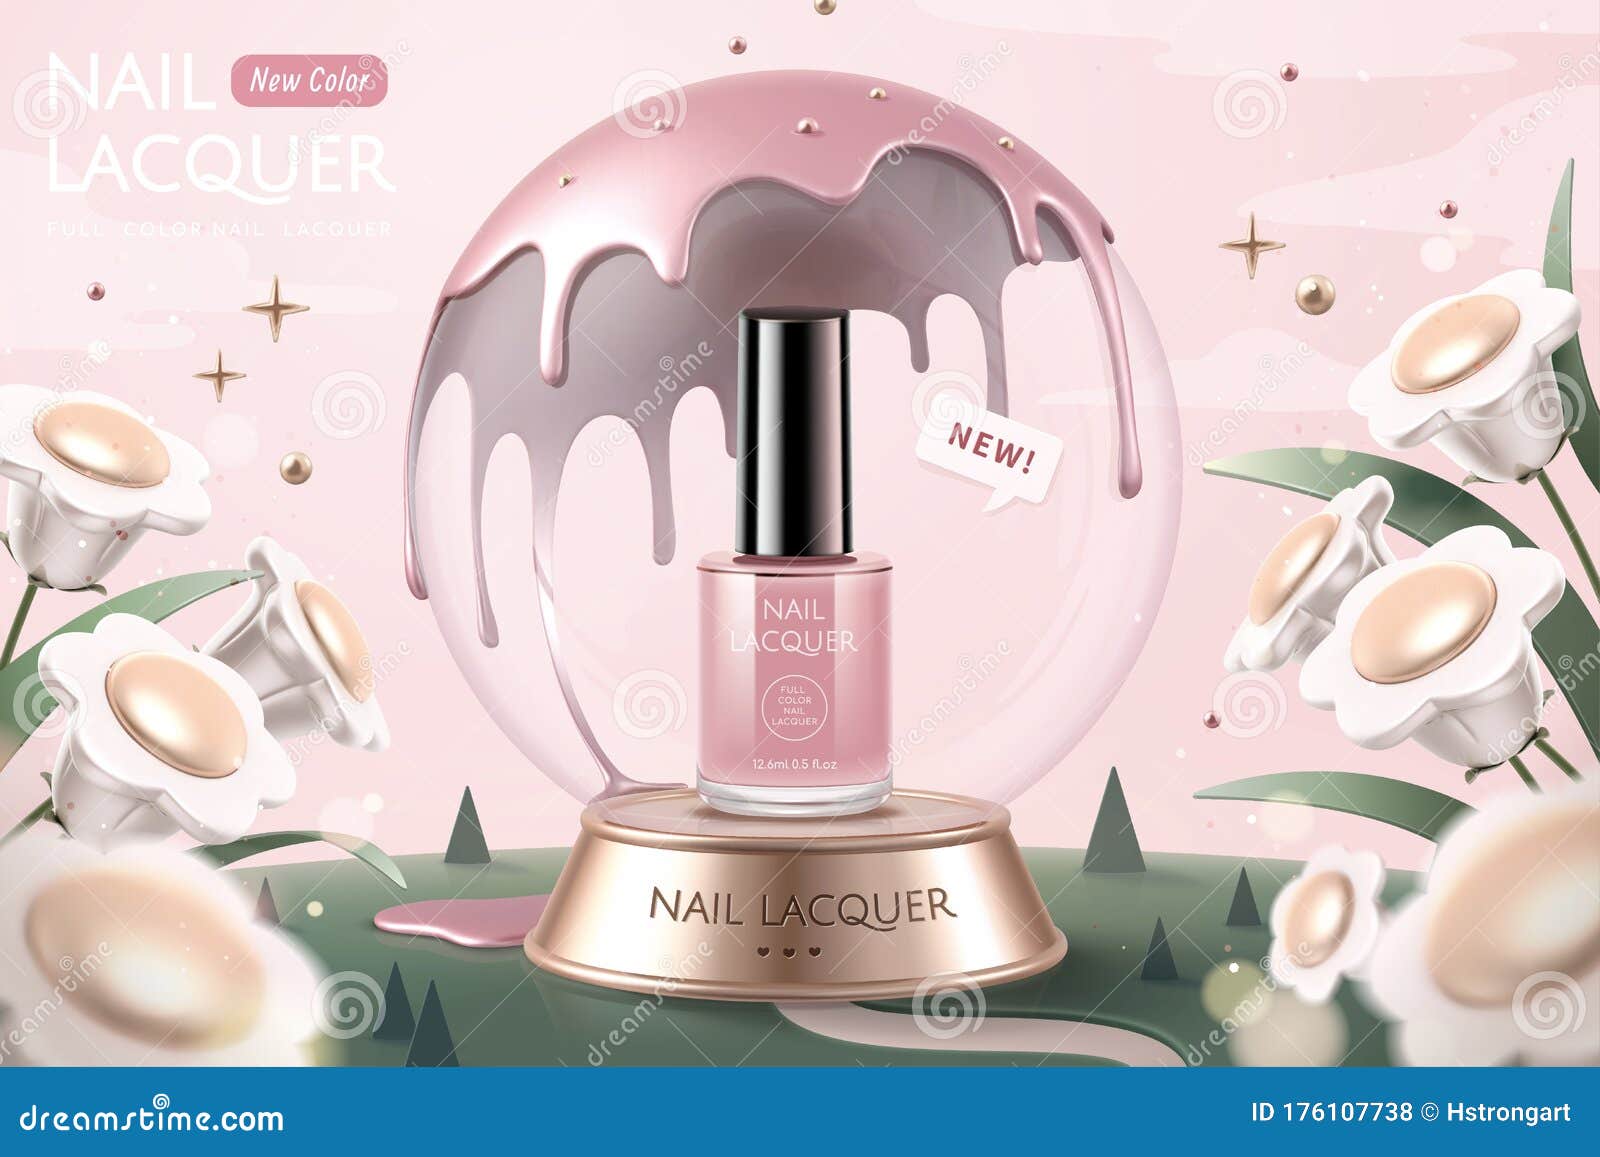 pink nail lacquer in snow globe ads